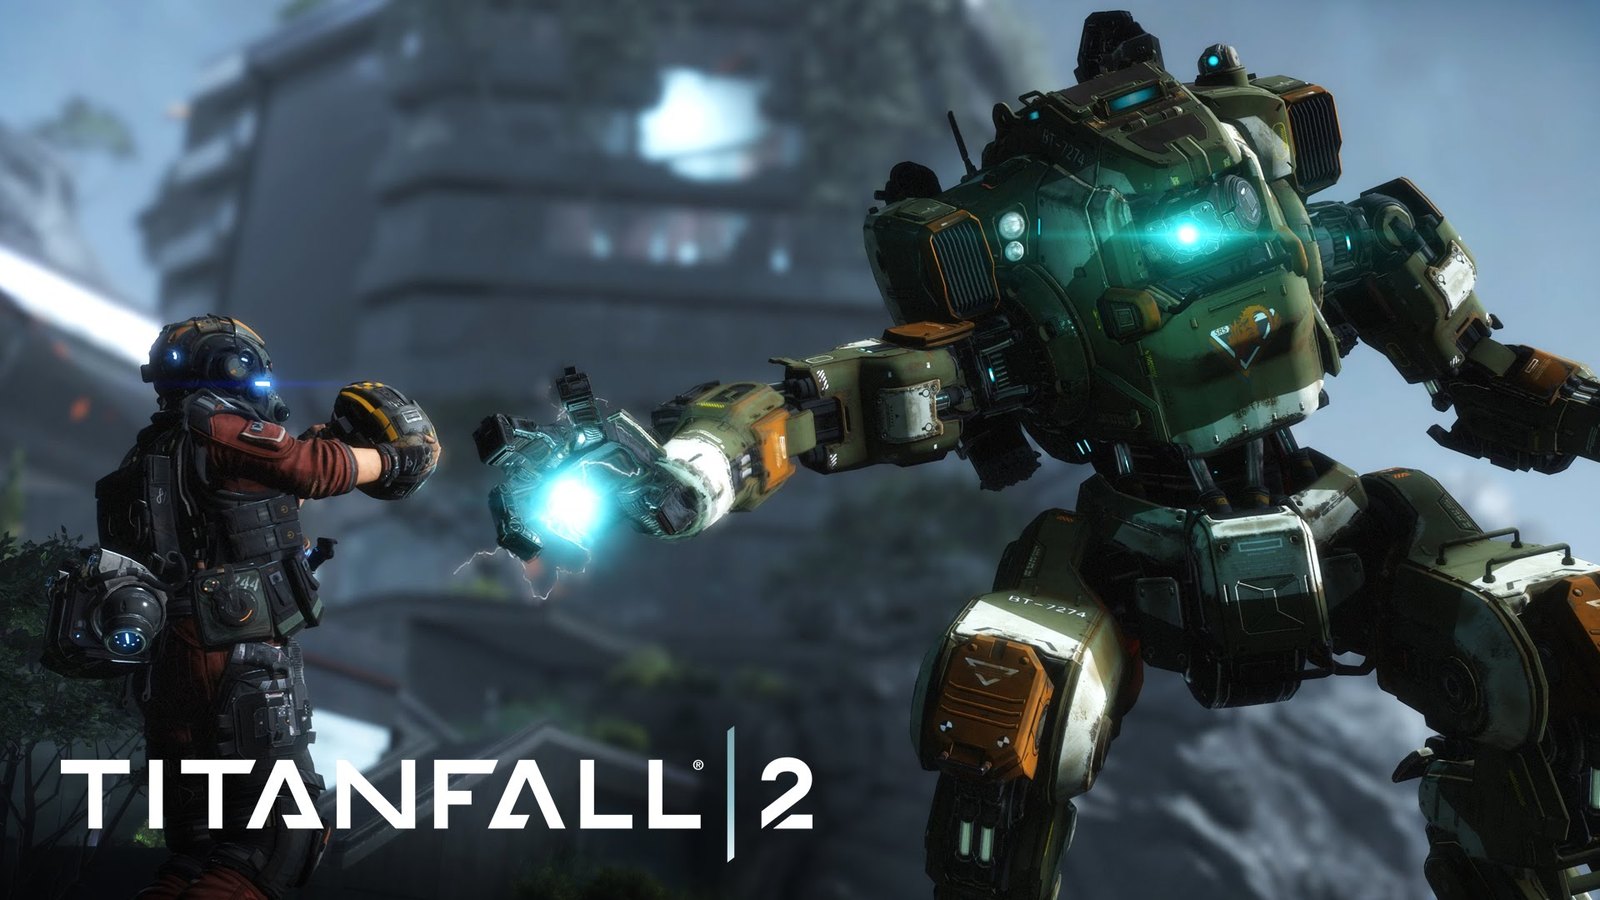 Titanfall 2 hacked by CODEX. - Crack, Codex, Titanfall, Titanfall 2, Piracy, Pirates, Denuvo, Games